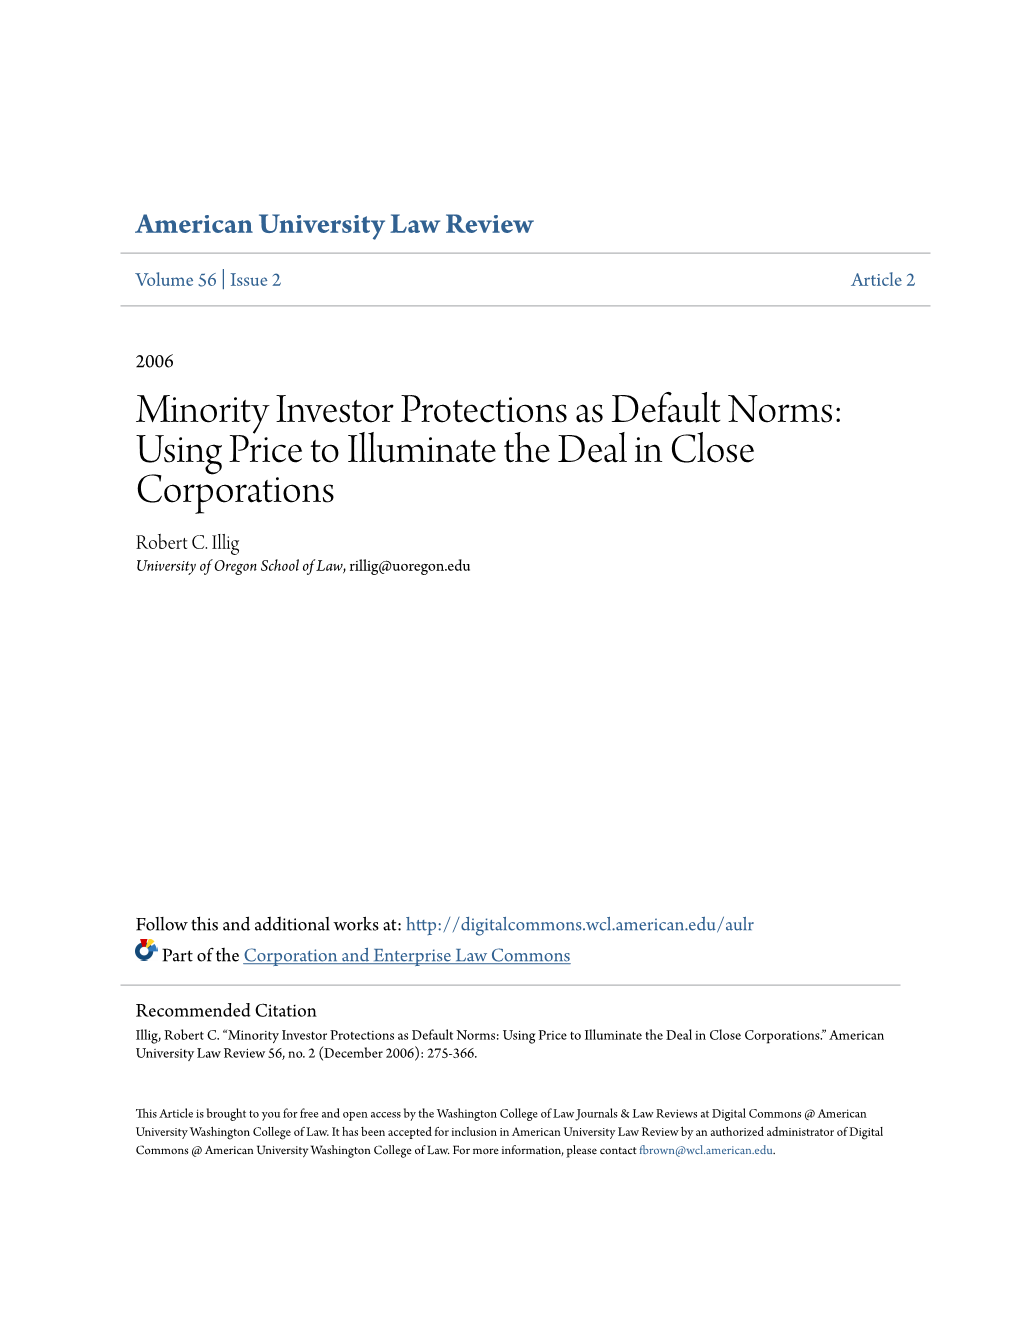 Minority Investor Protections As Default Norms: Using Price to Illuminate the Deal in Close Corporations Robert C